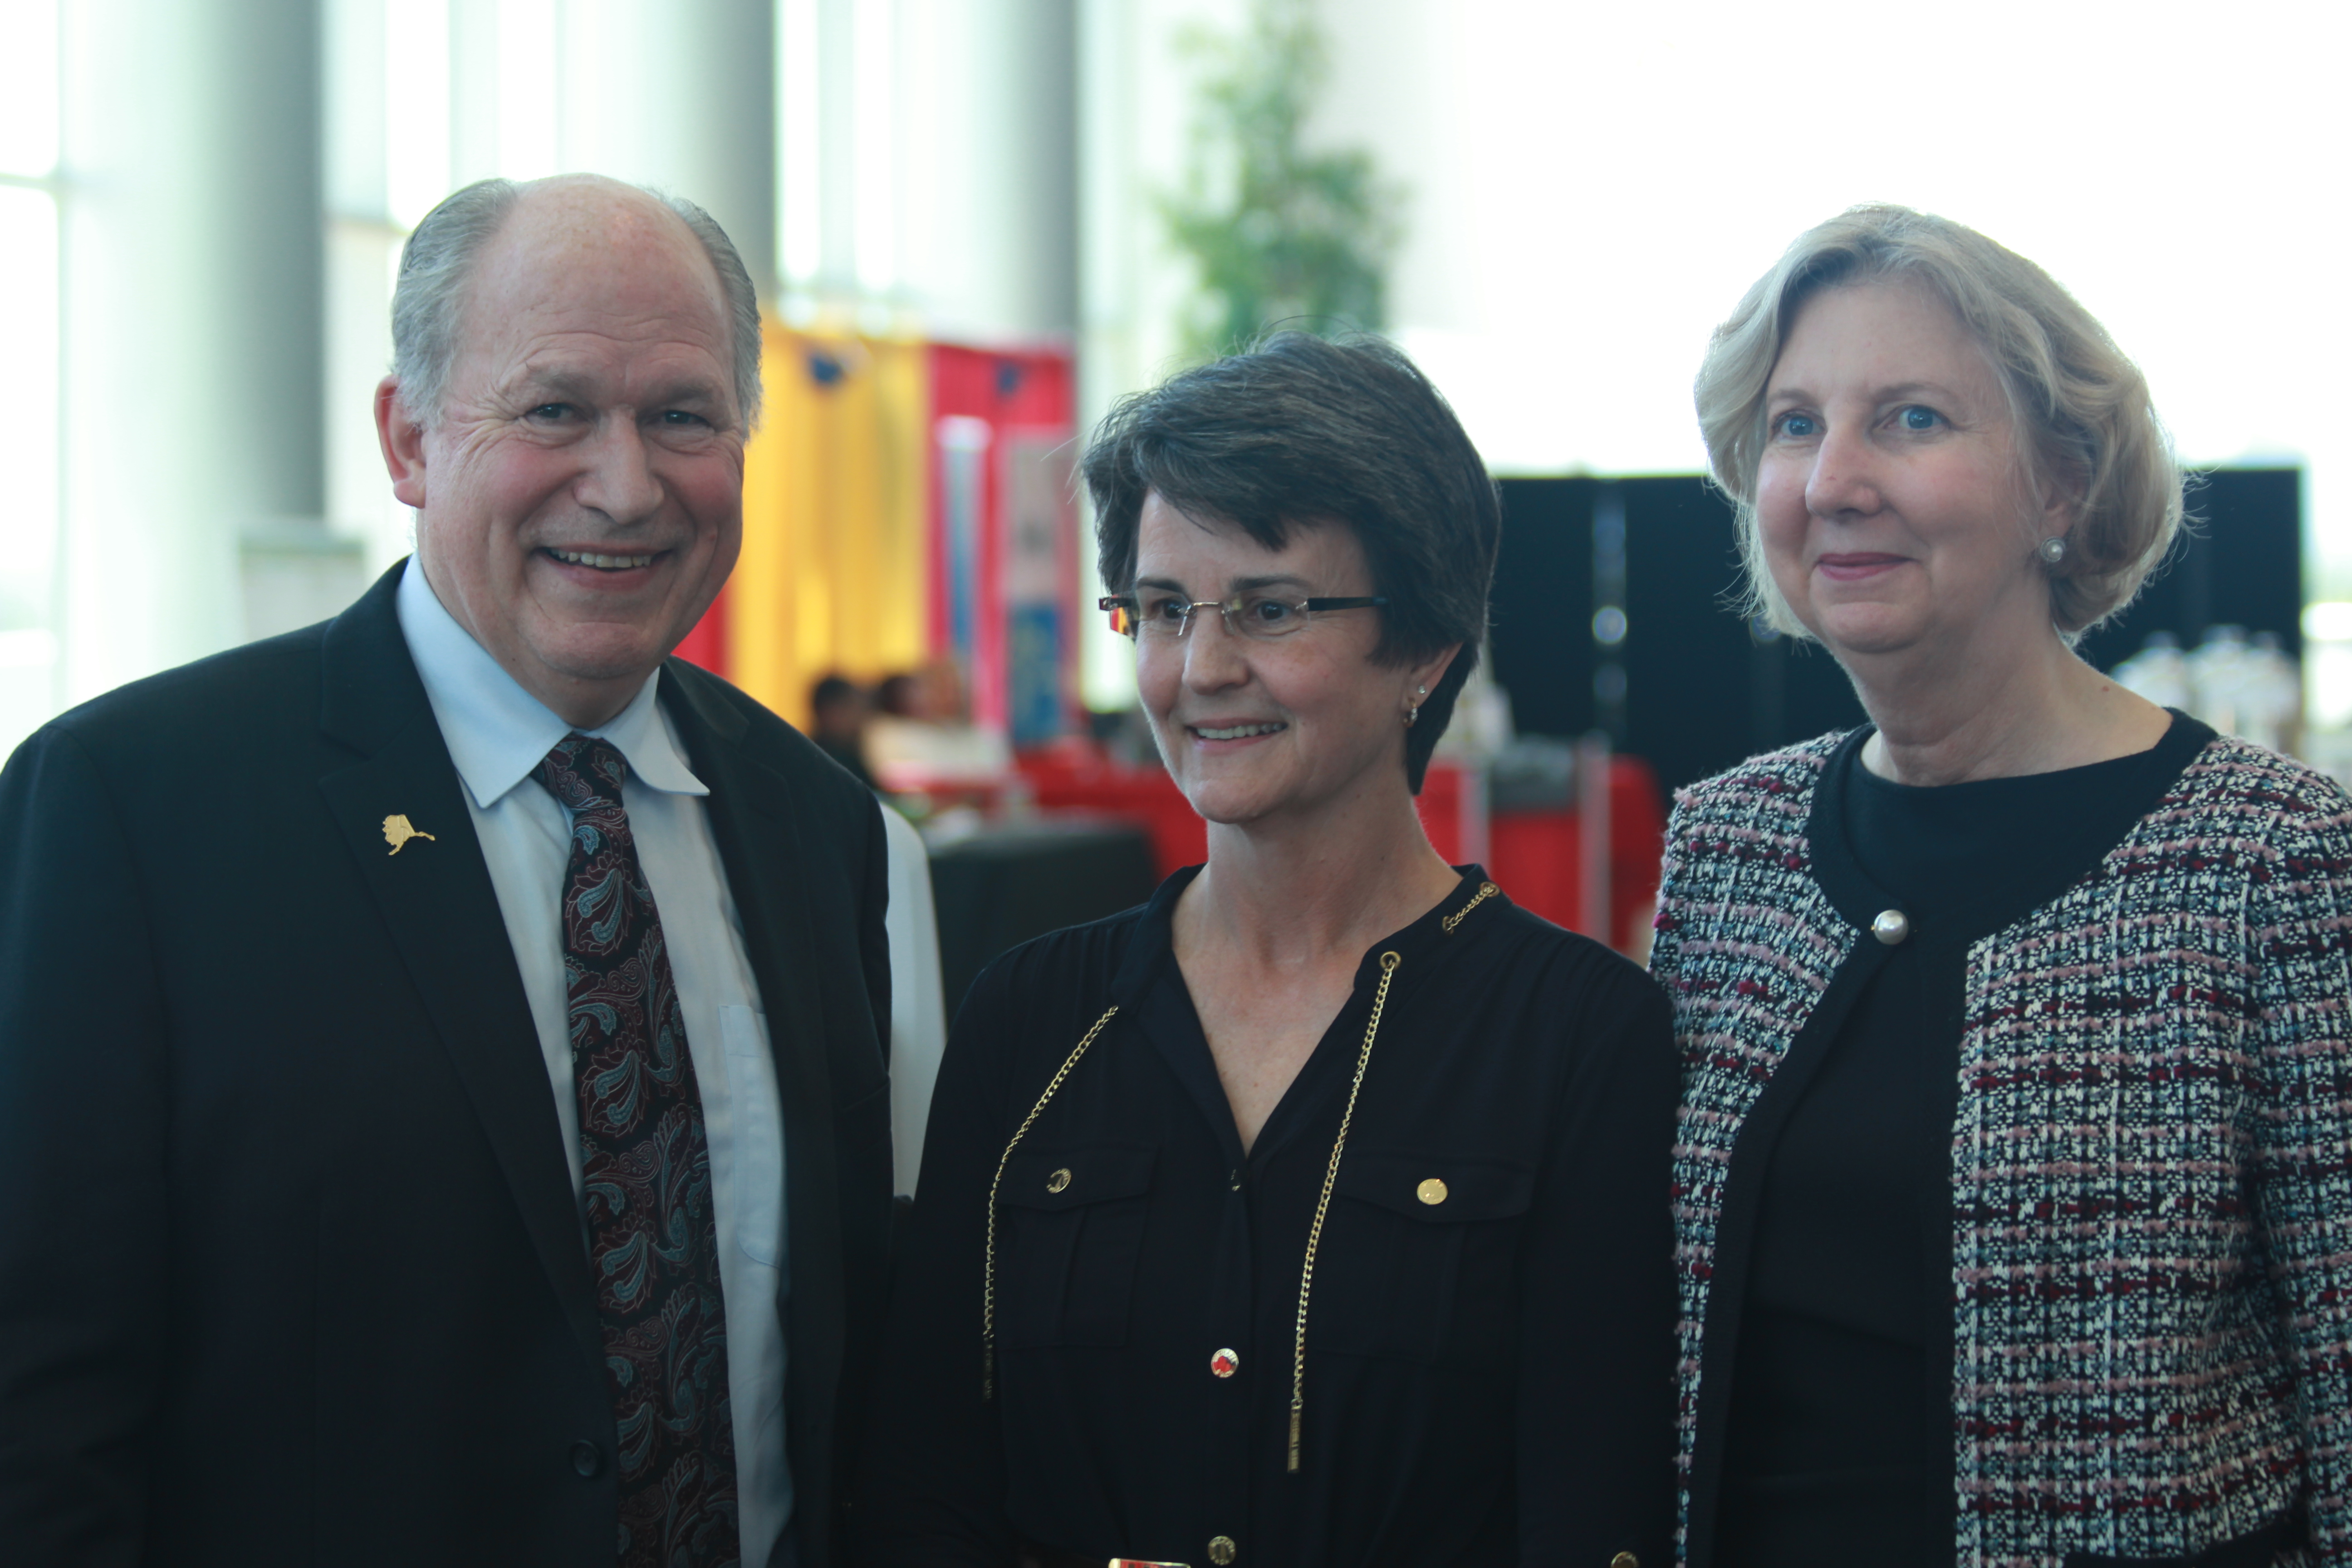 Governor Walker, Justice Susan Carney from Faibanks, and Supreme Justice Dana Fabe from Anchorage. Fabe will be retiring June 1st. (Photo by Wesley Early, APRN - Anchorage)